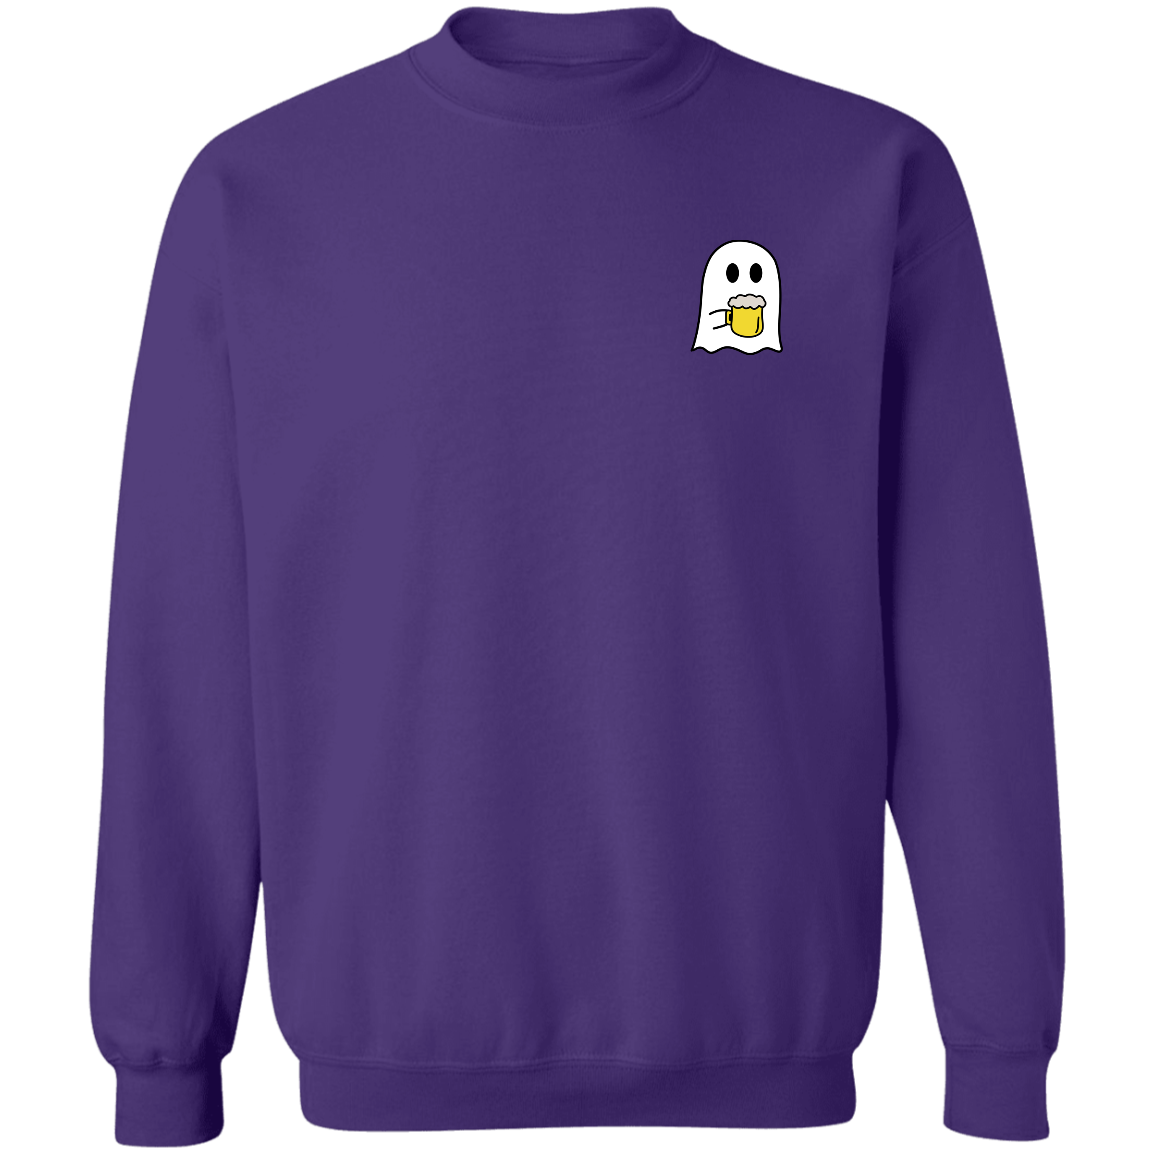 Get trendy with Coffee-drinking ghost  Crewneck Pullover Sweatshirt - Sweatshirts available at Good Gift Company. Grab yours for $30 today!